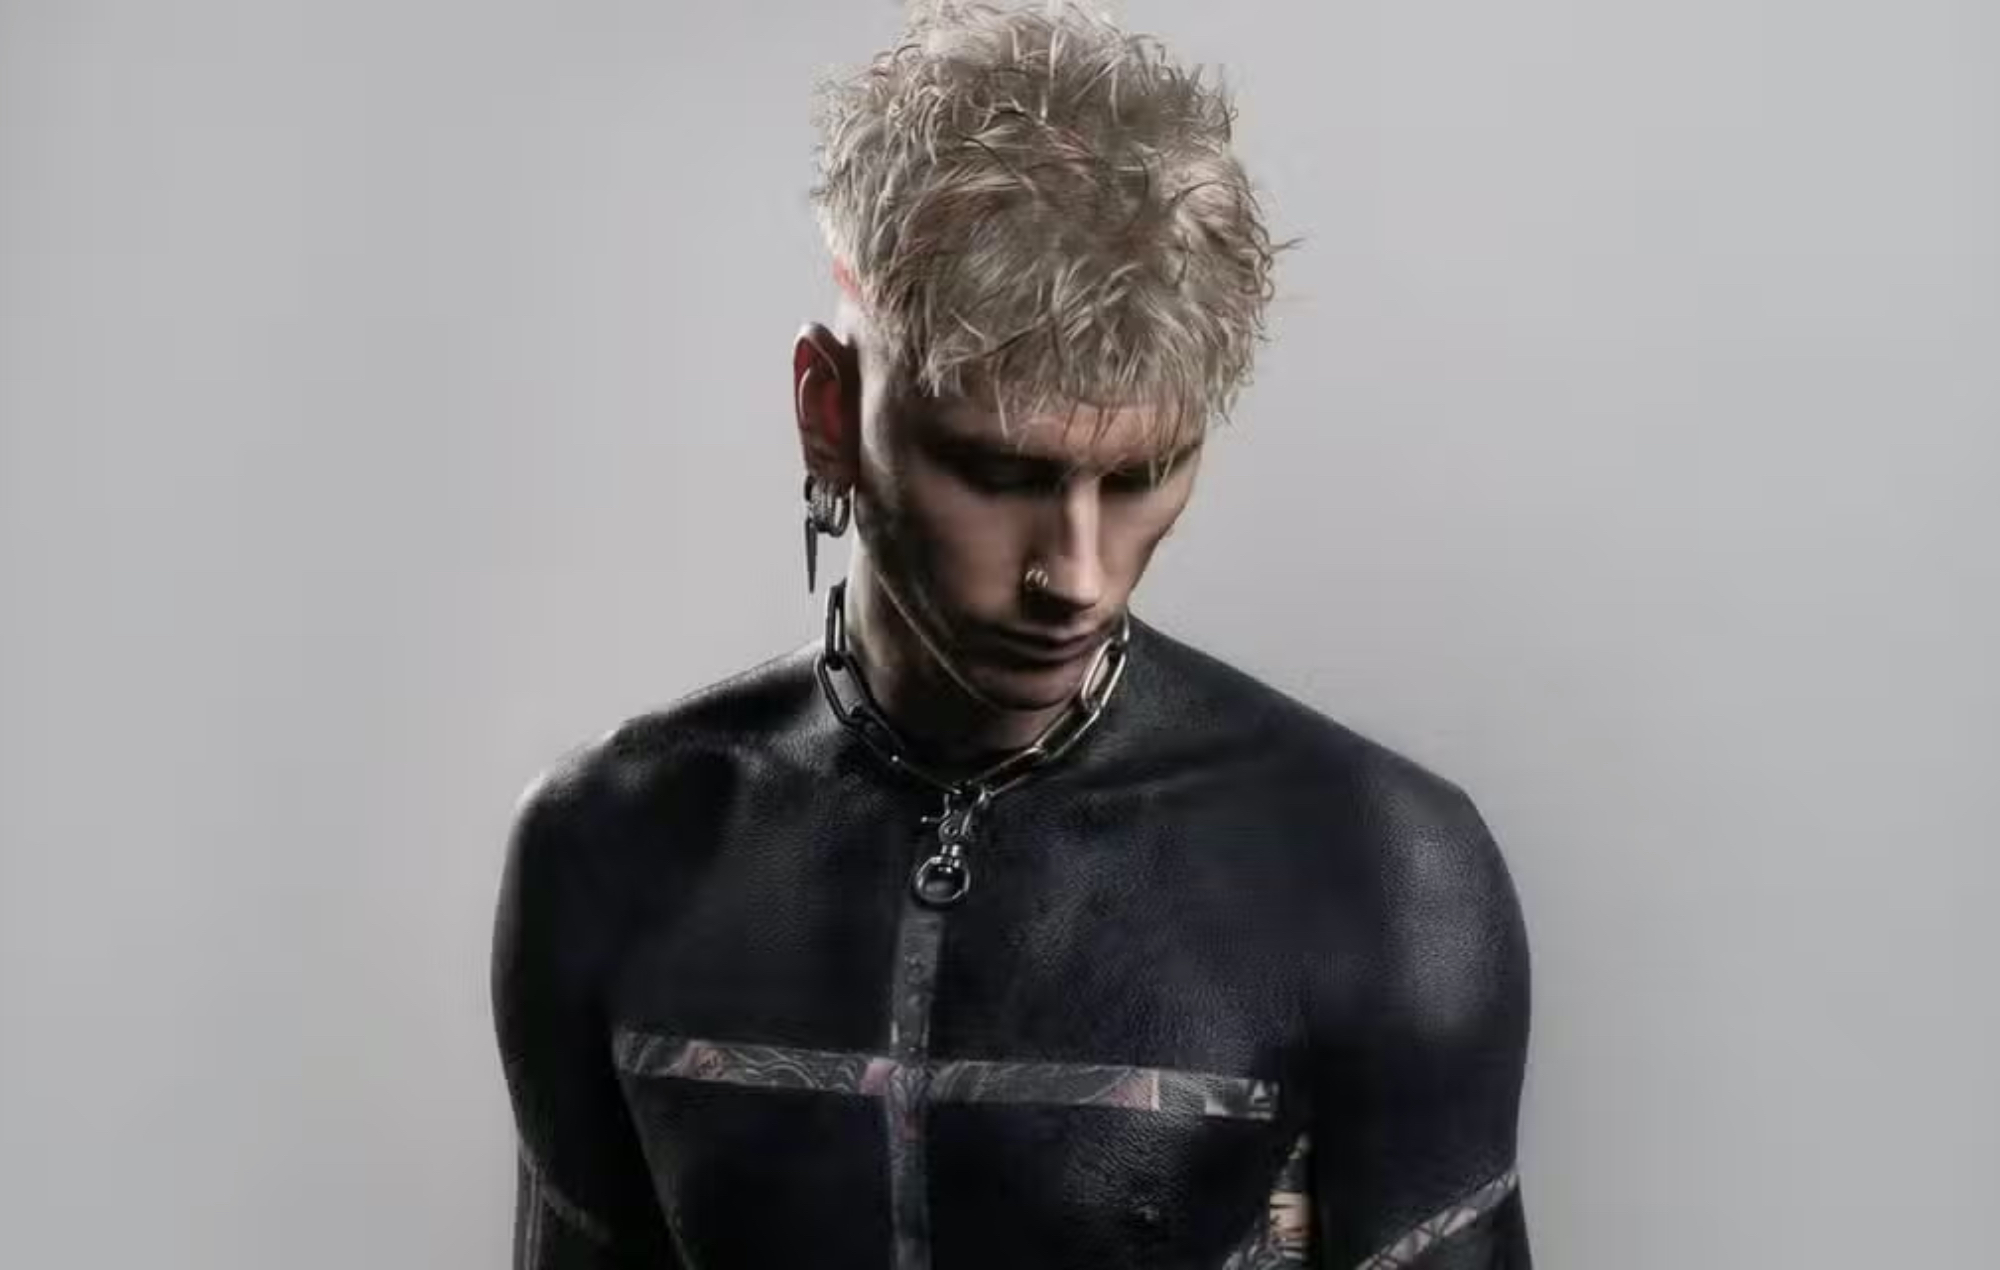 Machine Gun Kelly describes gruelling blackout tattoo sessions: “The most painful shit I’ve ever experienced”